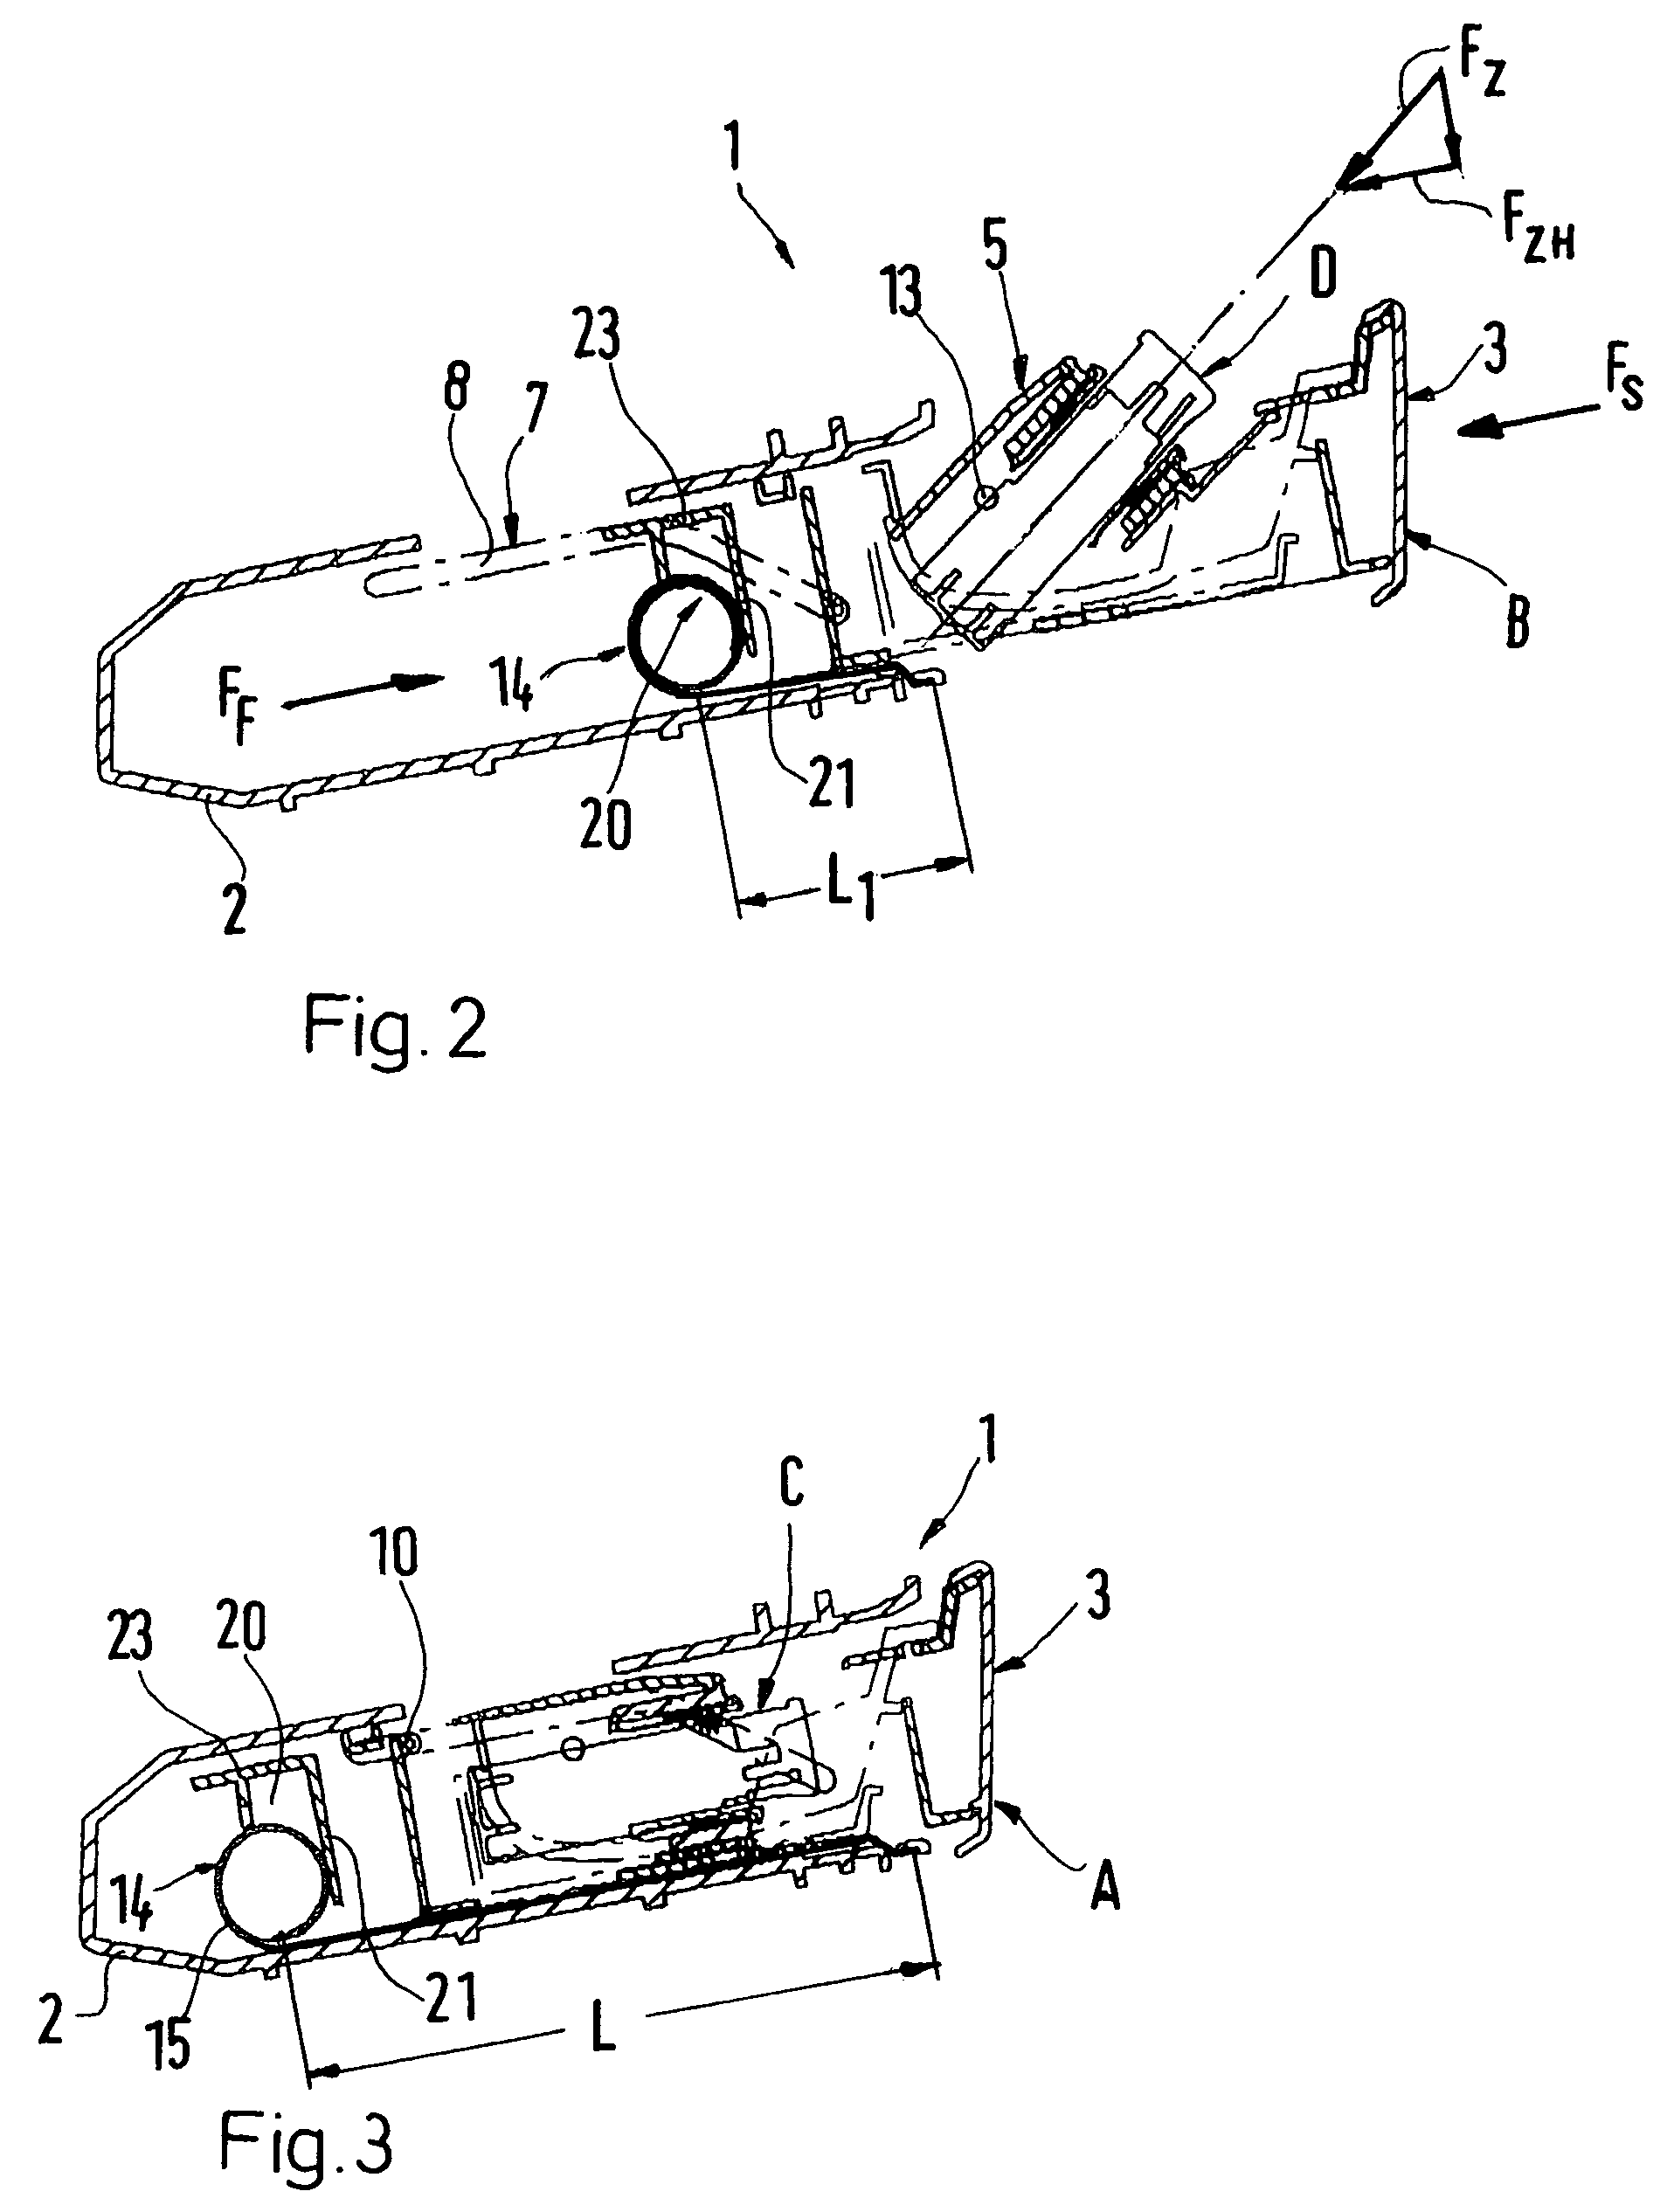 Built-in ashtray for a motor vehicle and method of making same